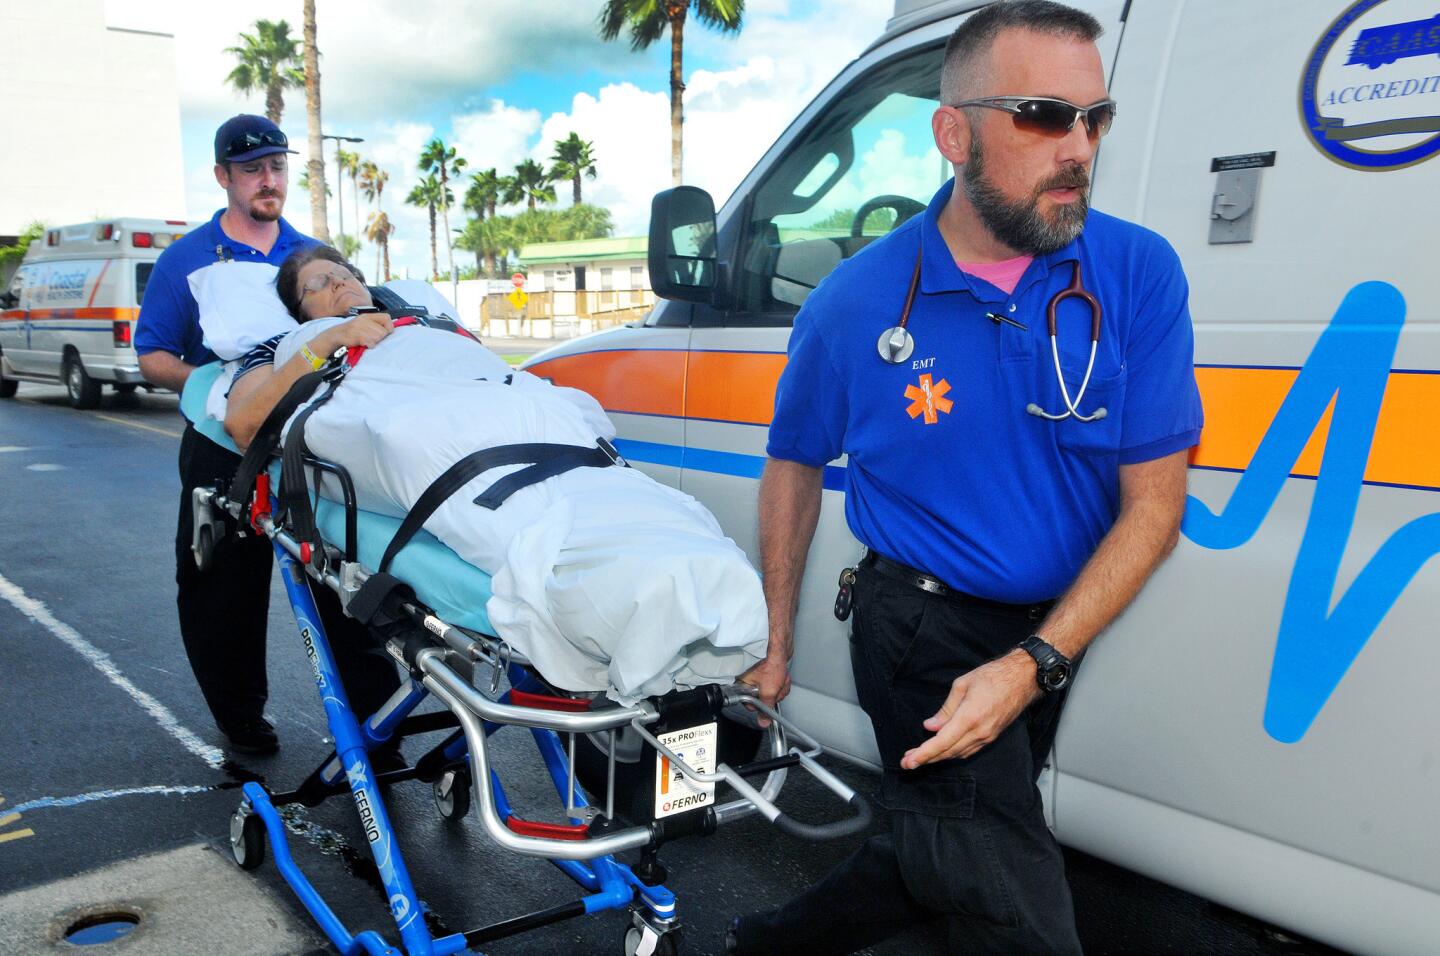 Keith Nelson and Jason Greene with Coastal Health Systems ambulance service evacuate patient Linda LaPorta from the Cape Canaveral Hospital in Cocoa Beach, Fla., on Oct. 5, 2016, as they prepare for the impact of hurricane Matthew.